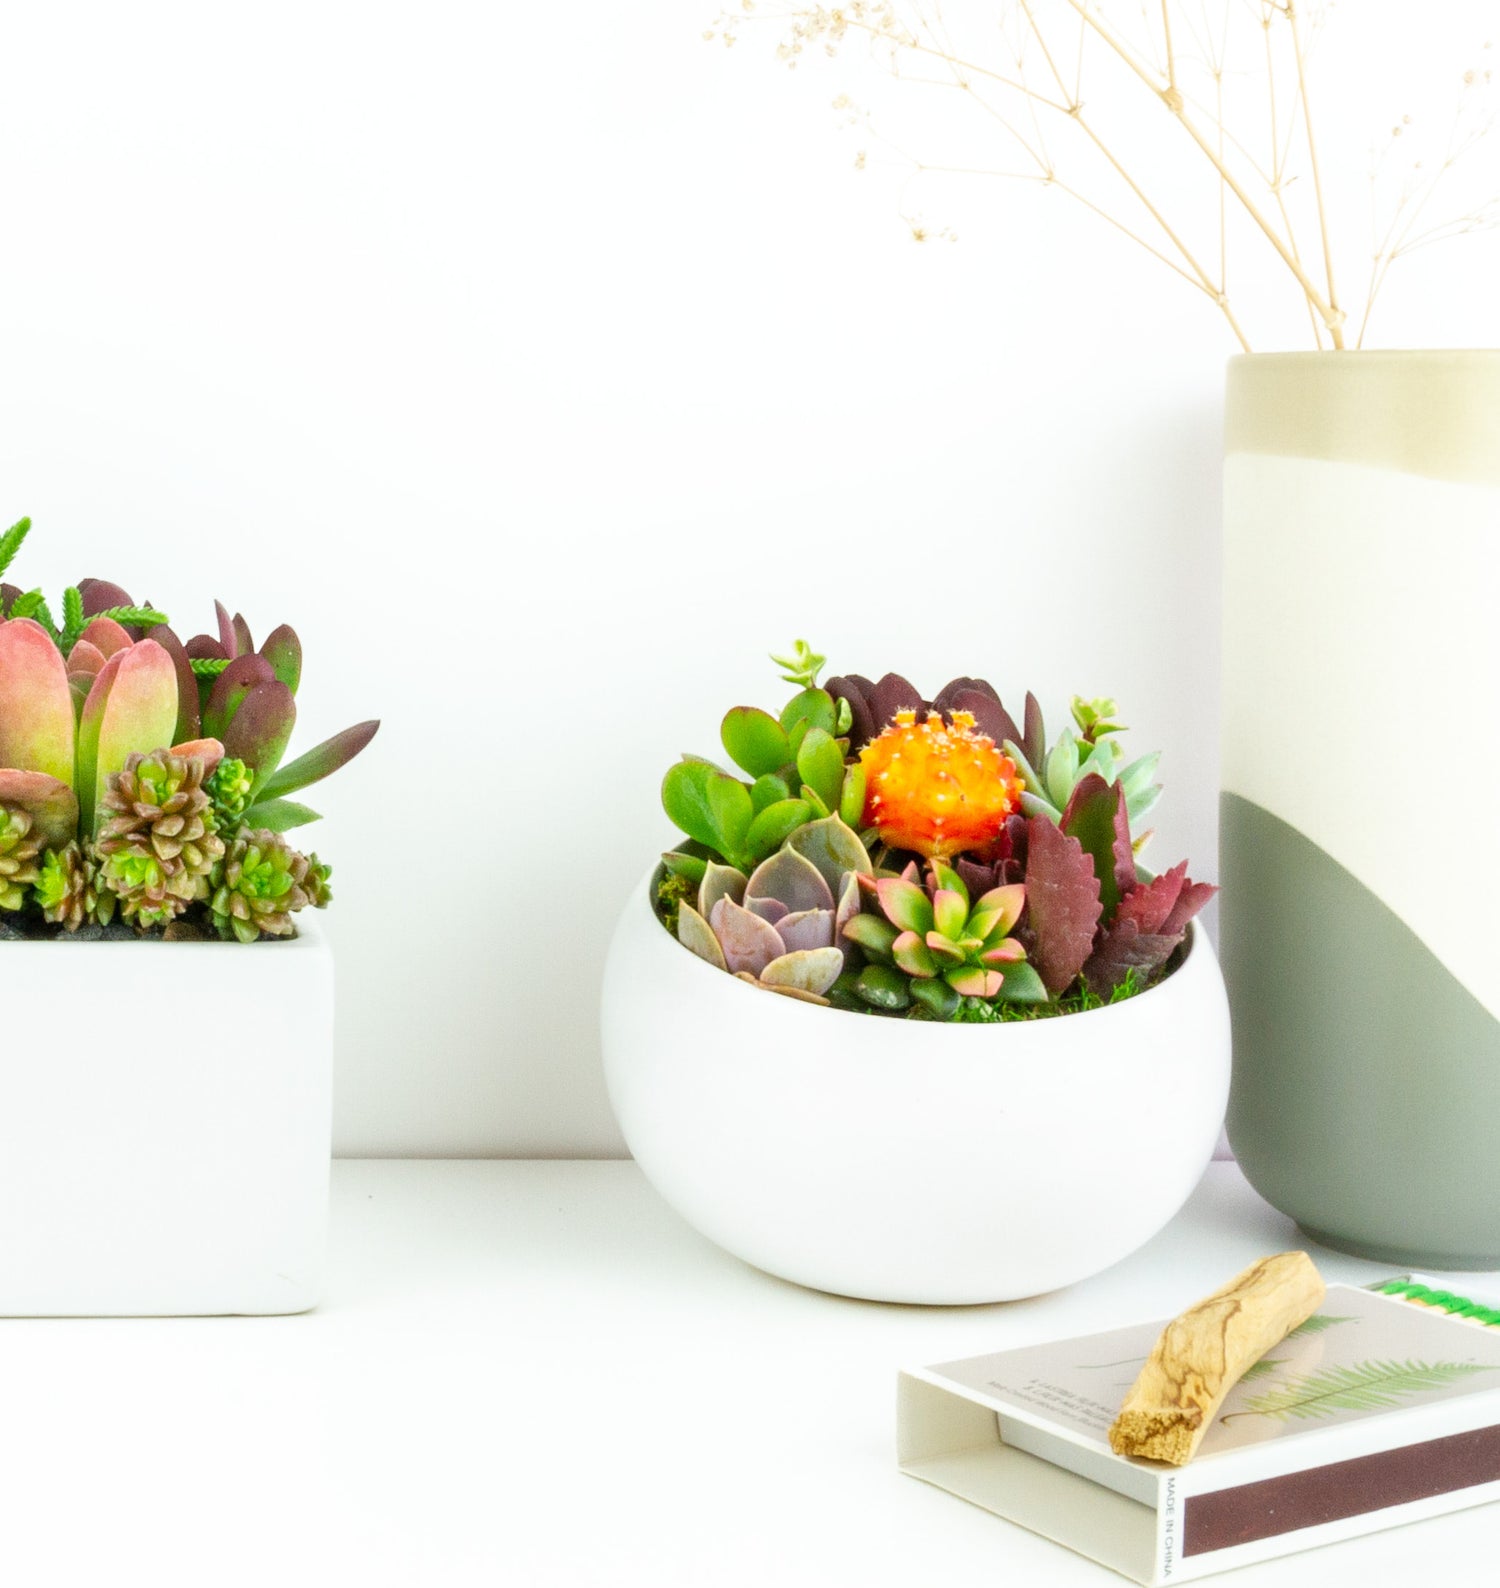 Live succulent arrangements potted in modern white ceramic pot made by Dewy Flowers in Los Angeles California